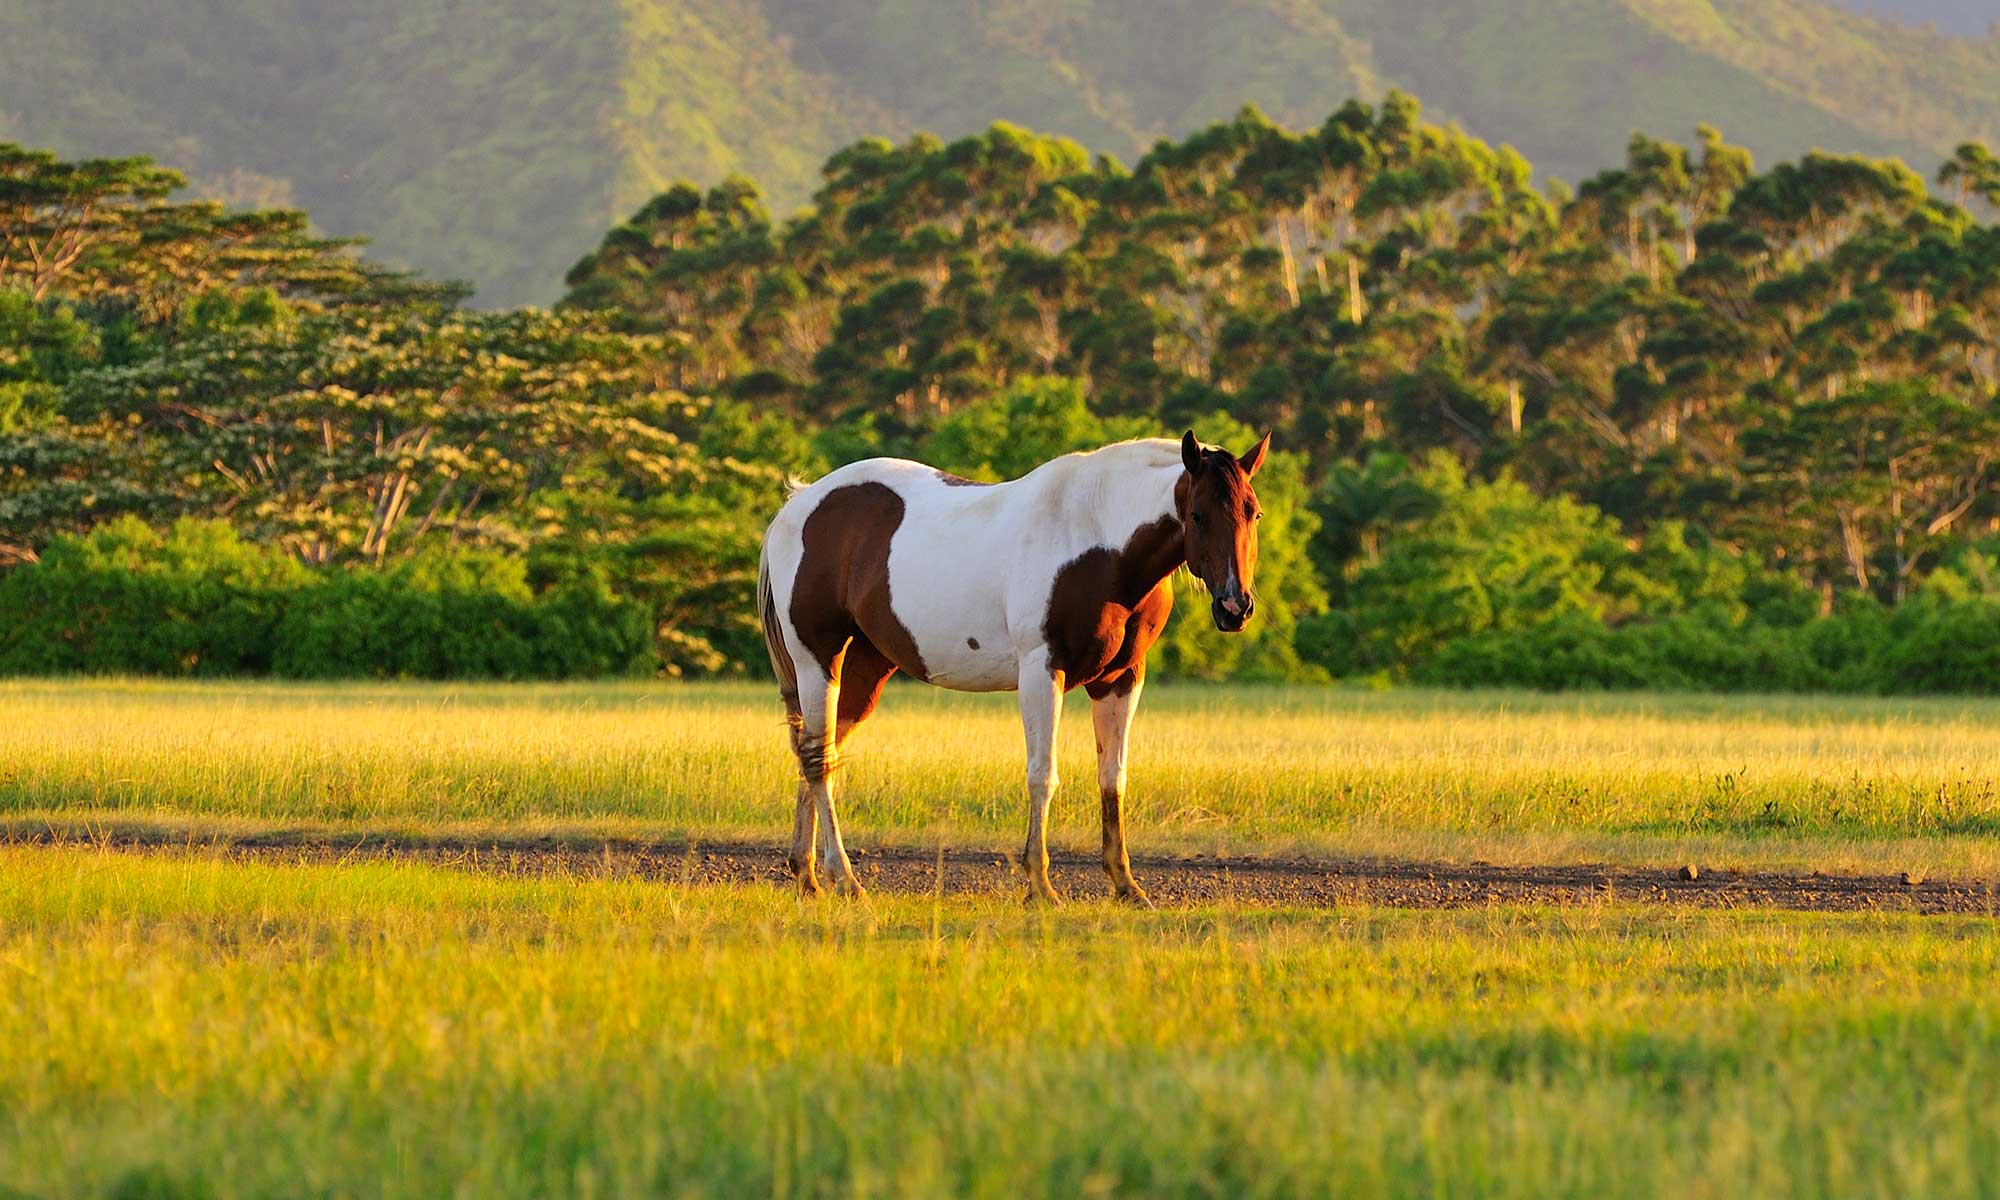 A horse standing in a field